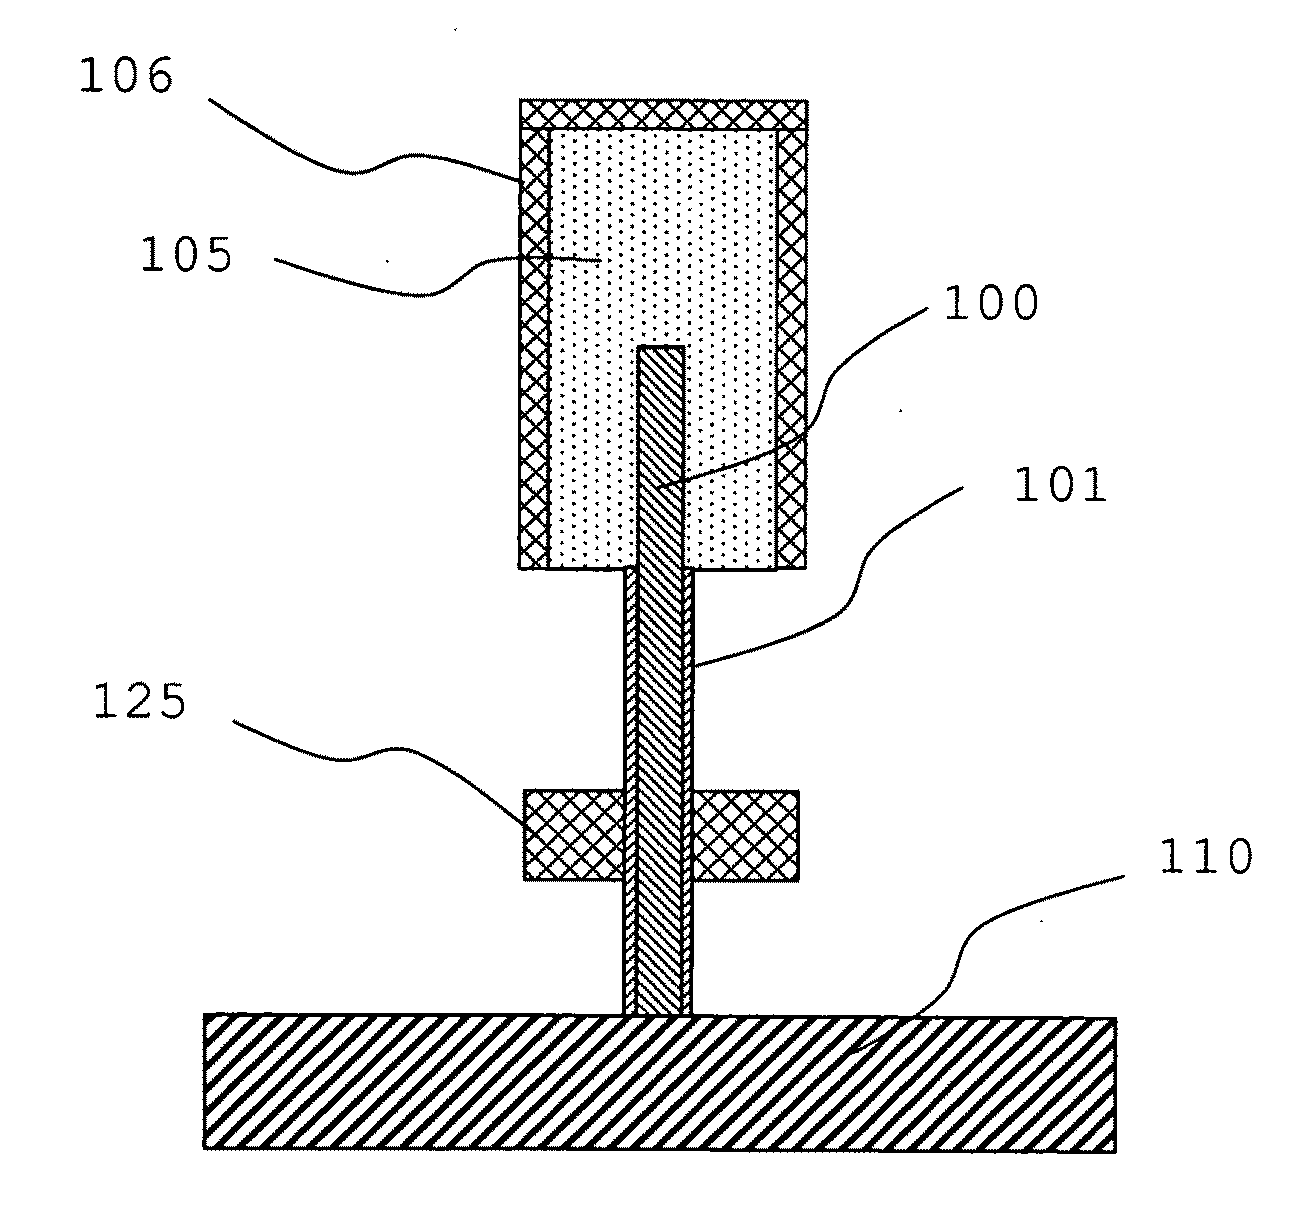 Nanoelectronic structure and method of producing such